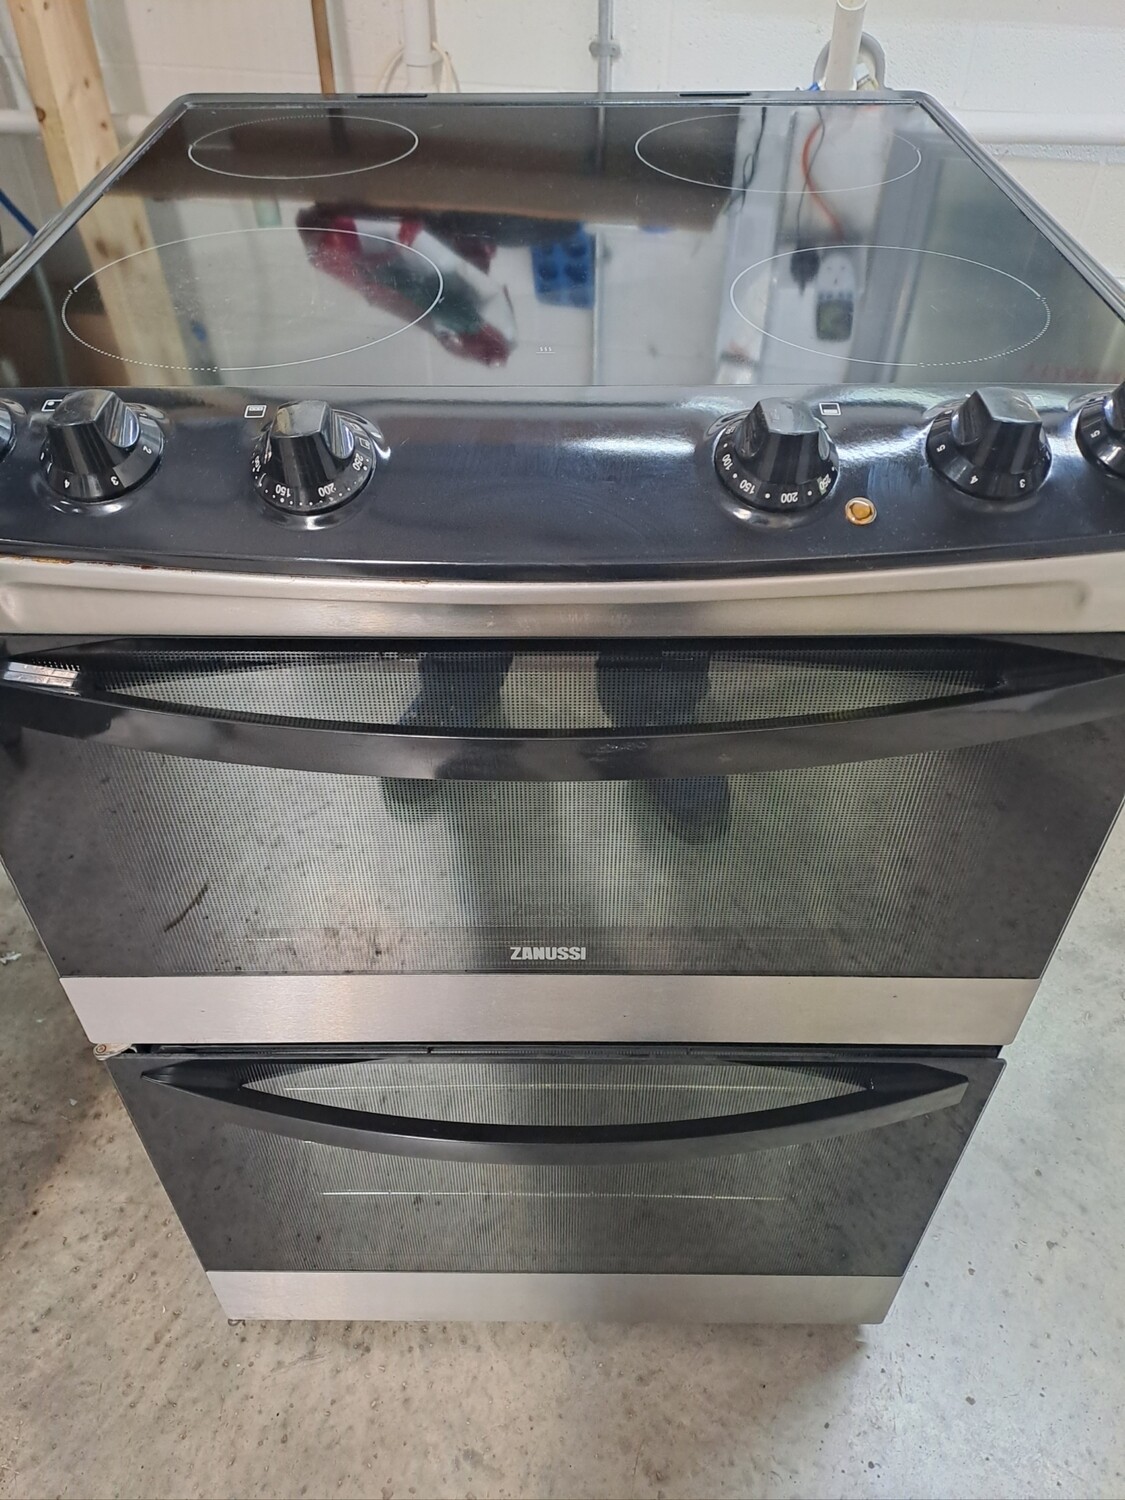 Zanussi ZCV66030XA 60cm Electric cooker Twin Cavity Double Oven Ceramic Hob - Black - Refurbished + 6 month guarantee. This item is located in our Whitby Road Shop